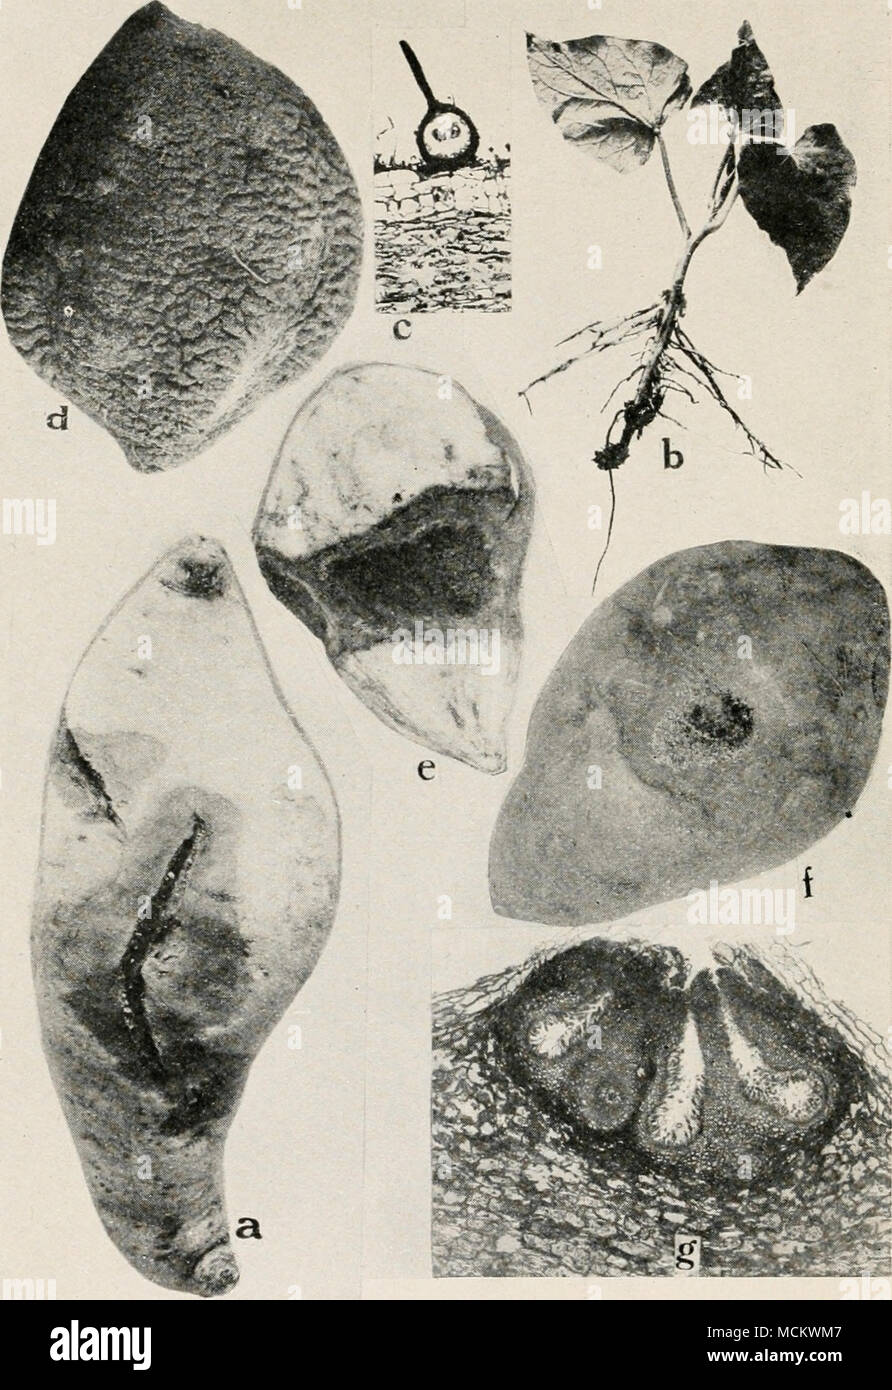 . Fig. 26. Sweet Potato Diseases. a. Black rot at place of a bruise, 6. black shank, c. showing a pycnidium of the black rot fungus, d. dry rot, e. cross section throug'i /, to show the effect of the disease on the root. /. Java black rot surface view, showing strings of spores oozing out from the center of spot, g. cross section through diseased sweet potato root to show pycnidia of the fungus Diplodia tubericola. Stock Photo